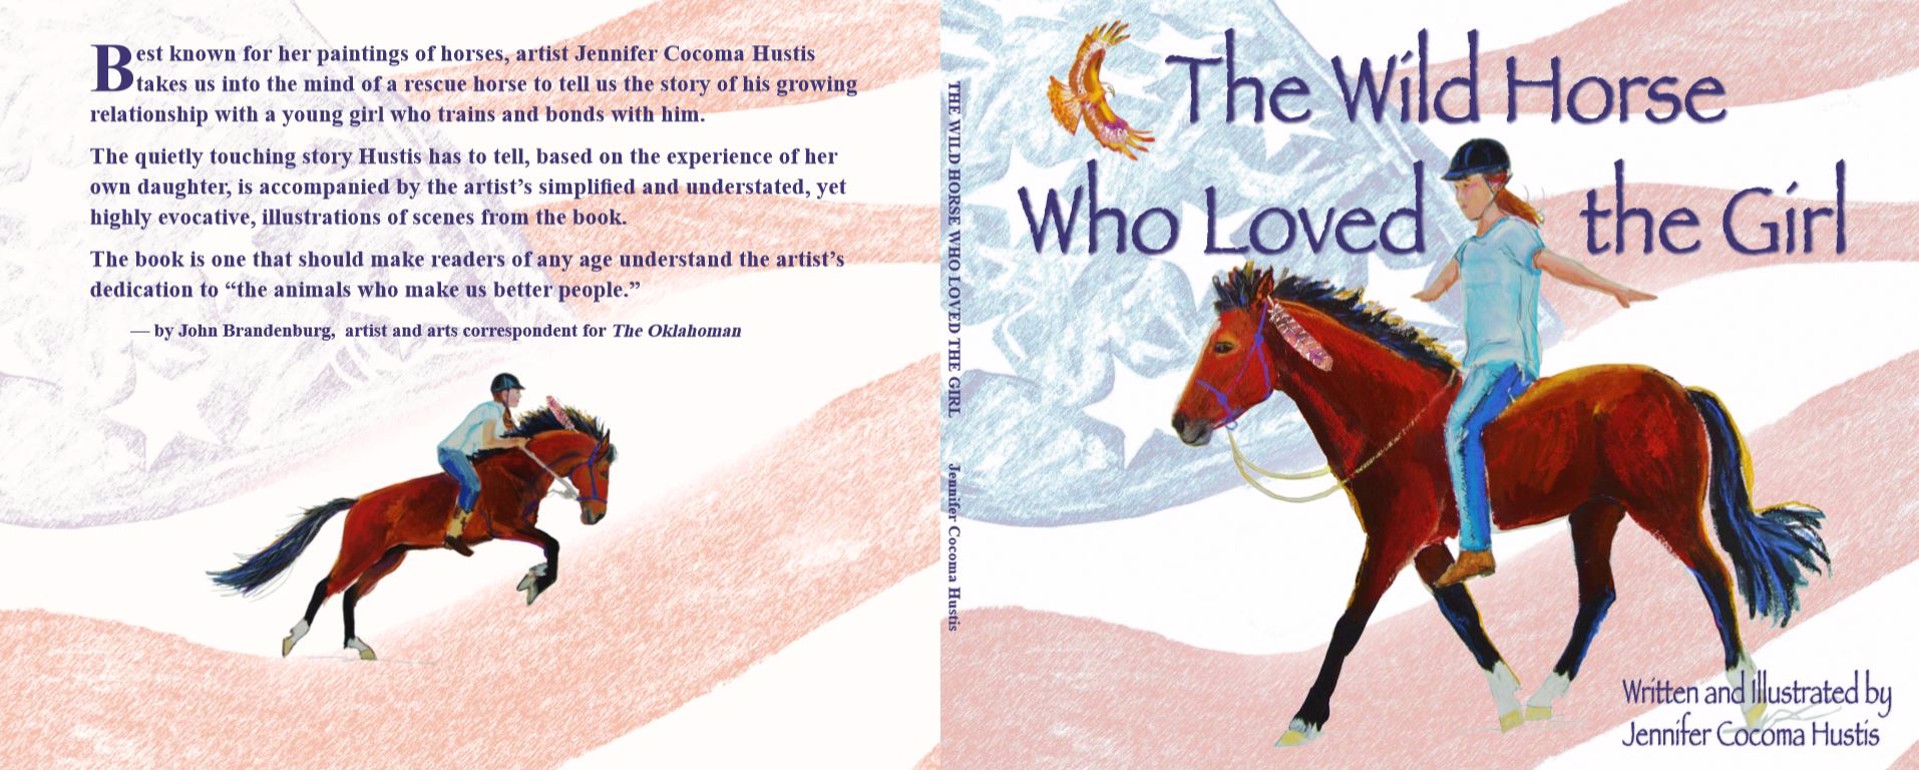 The Wild Horse Who Loved the Girl by Jennifer Cocoma Hustis